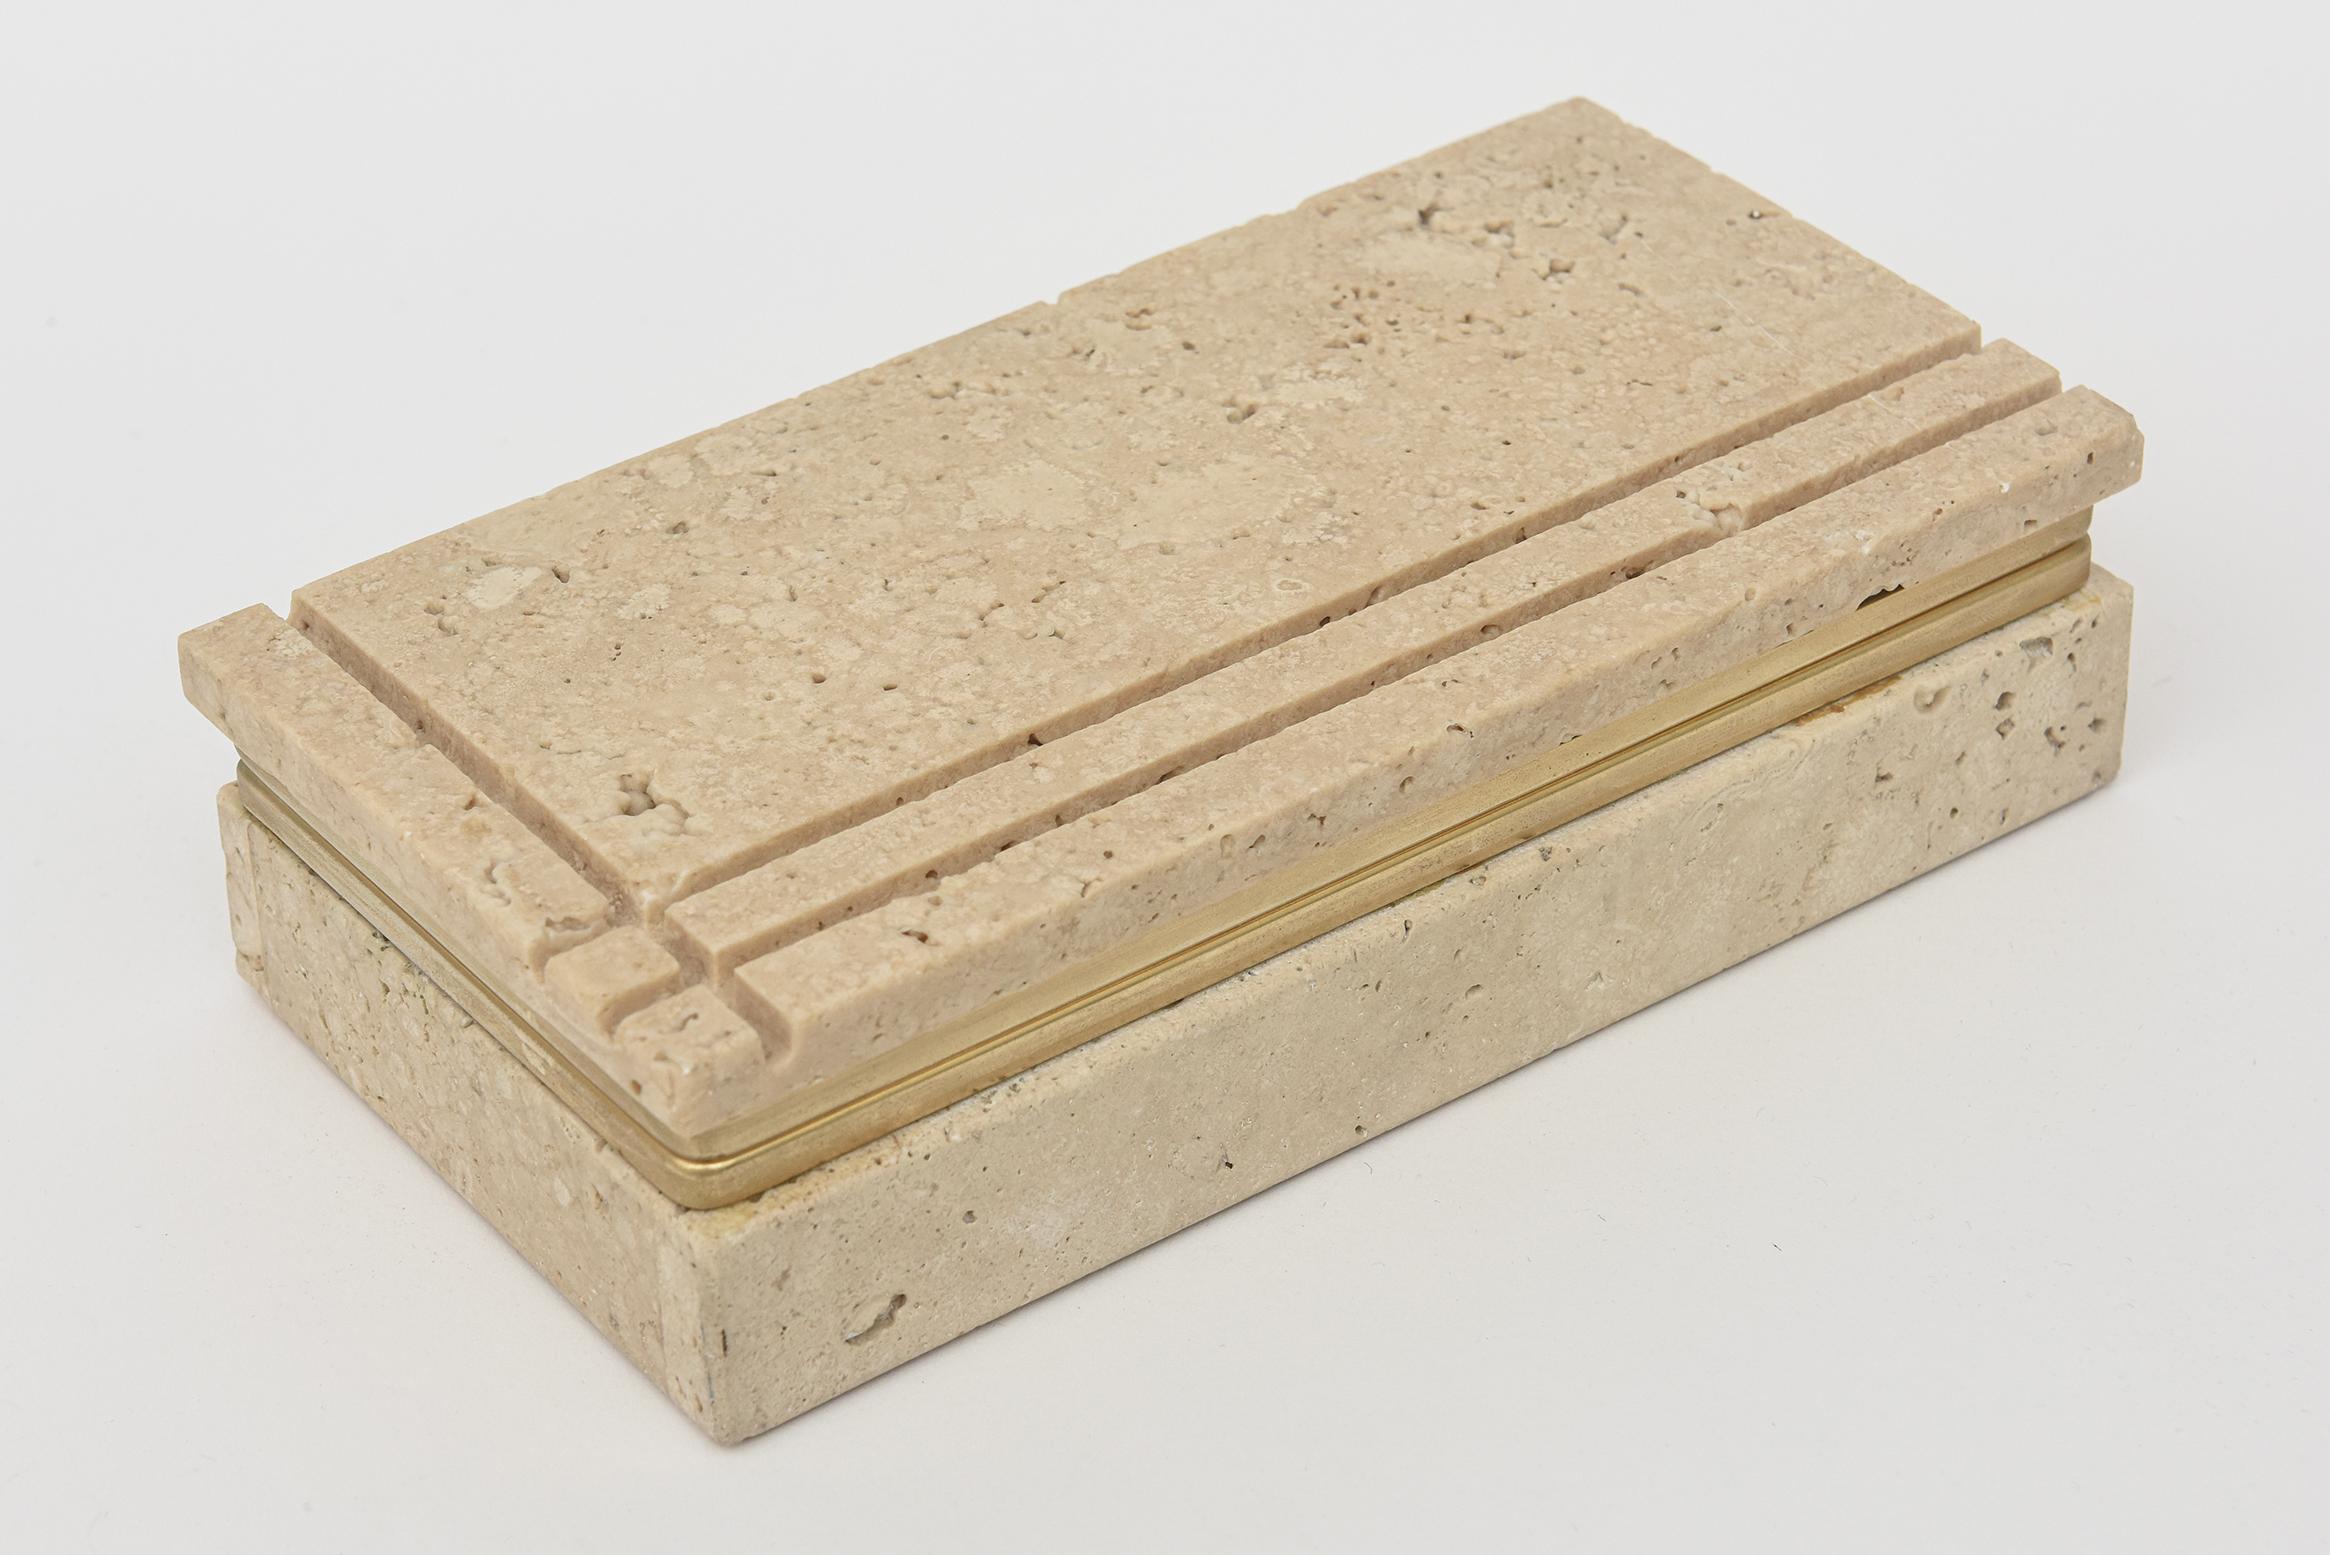 This vintage Italian travertine and brass hinged box is by the architect Enzo Mari. Great desk accessory and cocktail table addition. Very well made. From the 70's.